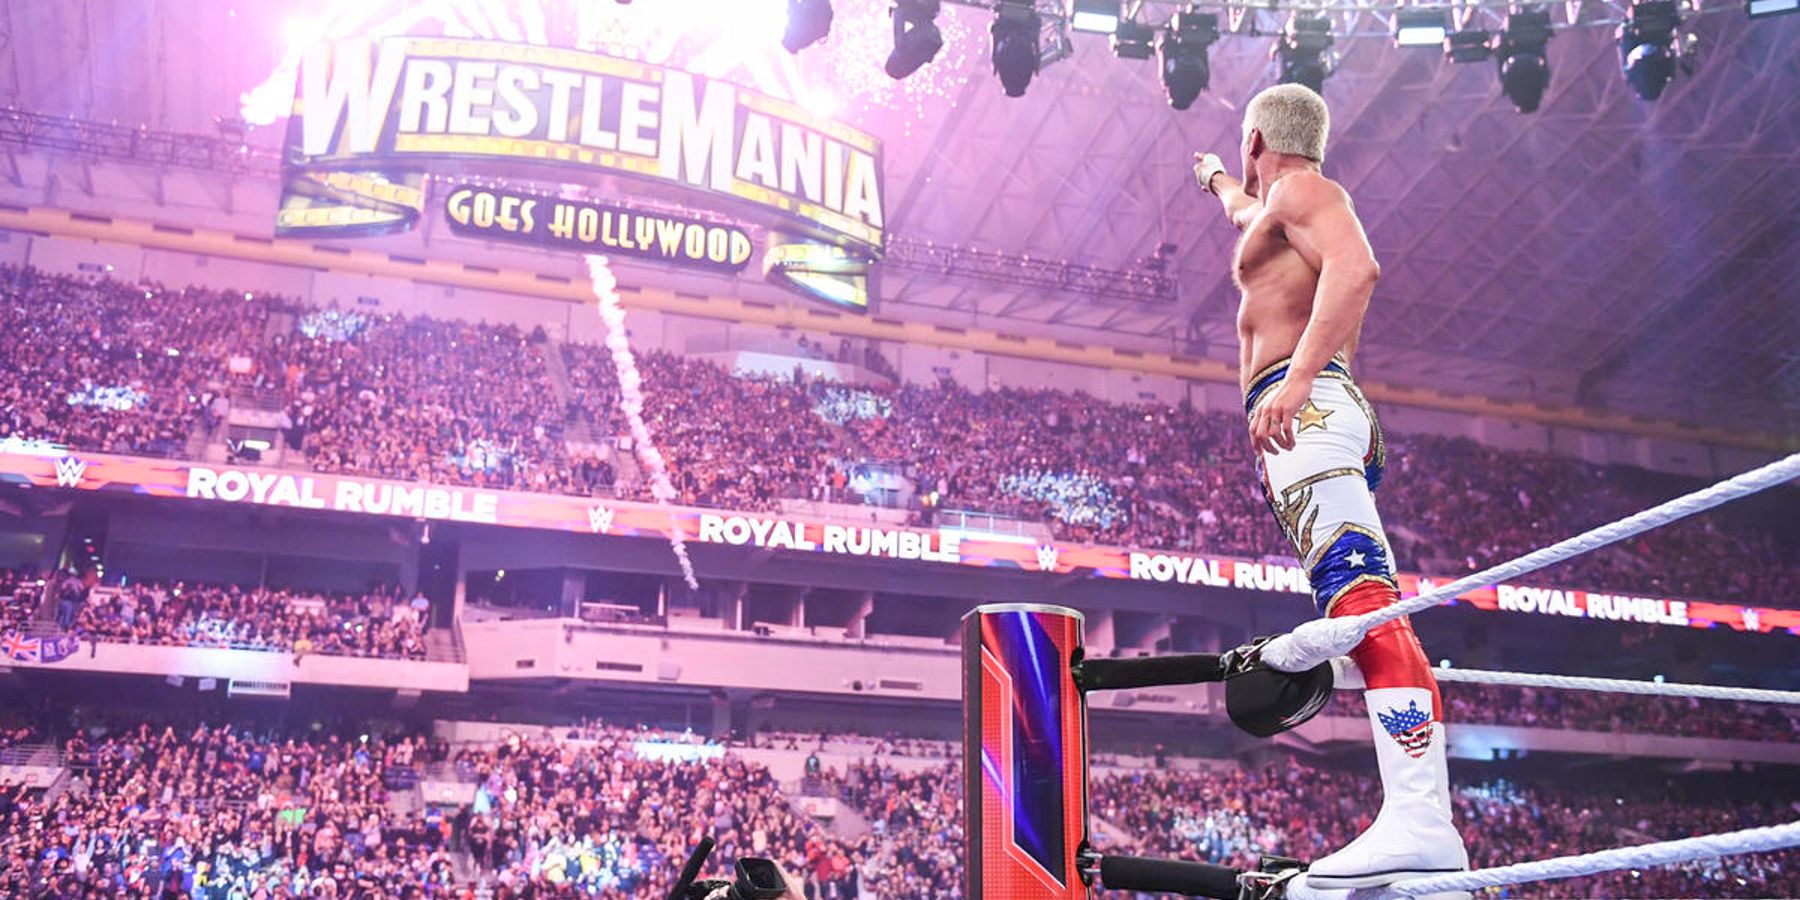 Cody Rhodes points to the WrestleMania sign after winning the men's Royal Rumble match in 2023.